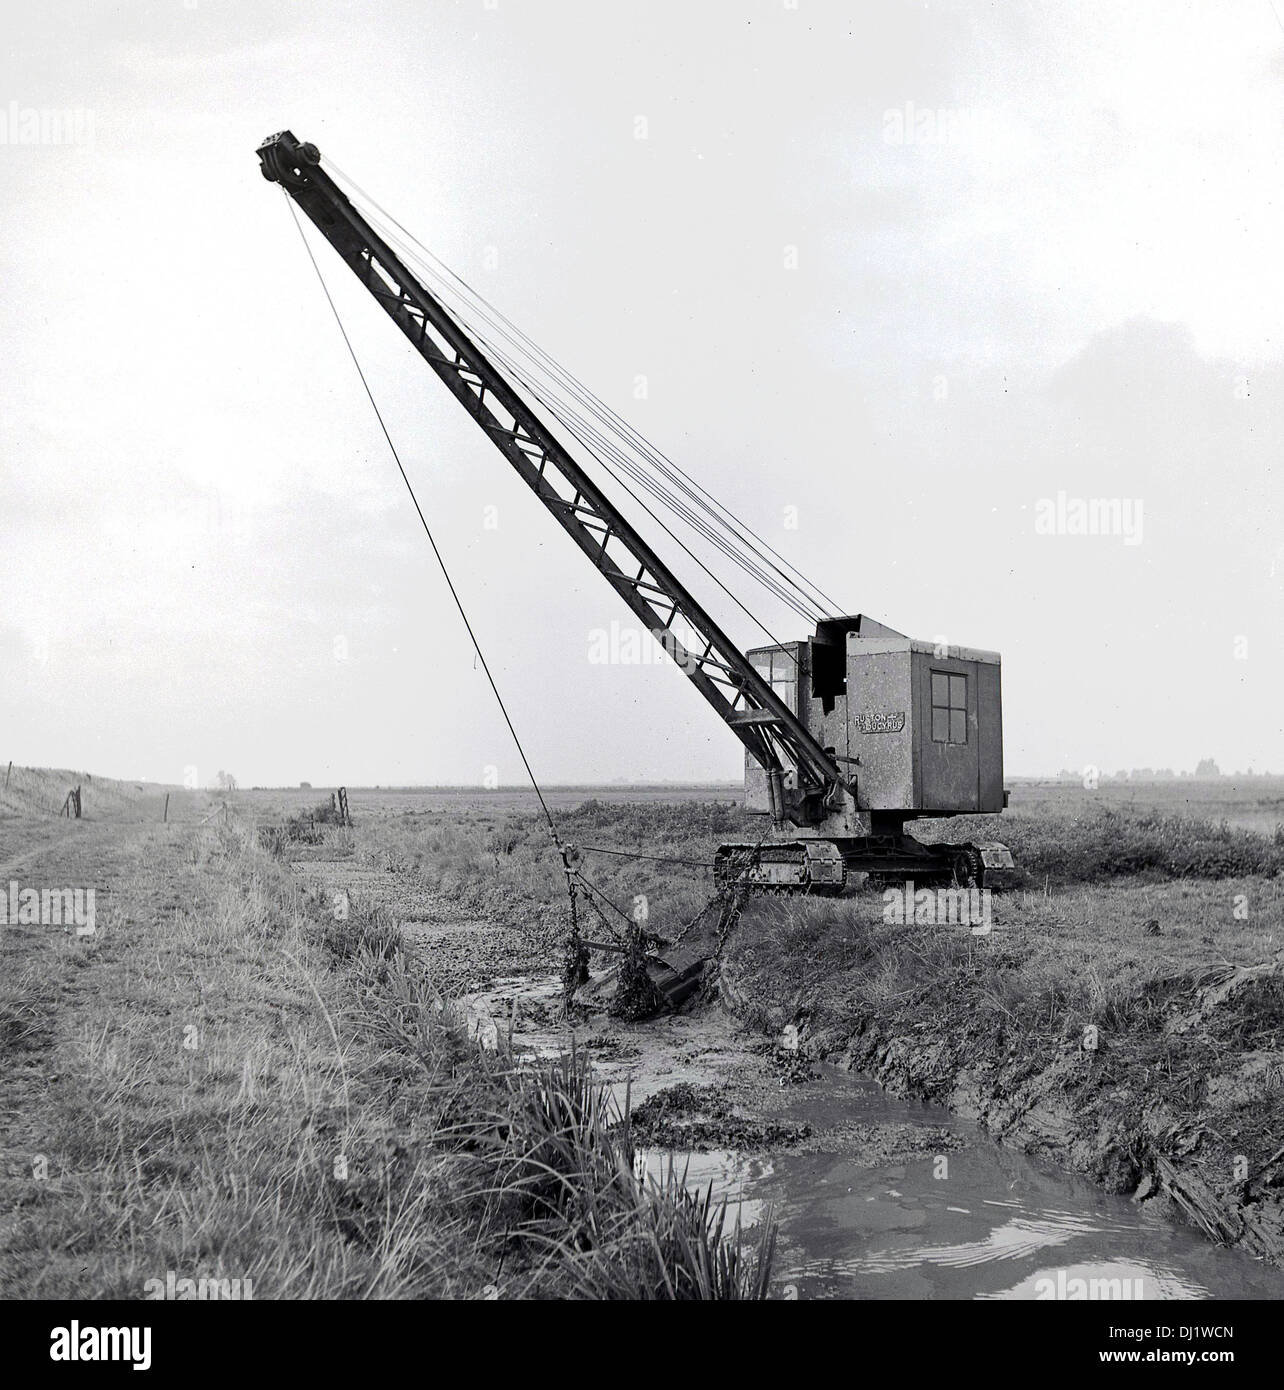 1950s, historical picture of a mechanical dragline bucket on crane with tracks positioned in a country field, excavating earth or mud from a small river or brook that runs beside it, England, UK. Stock Photo